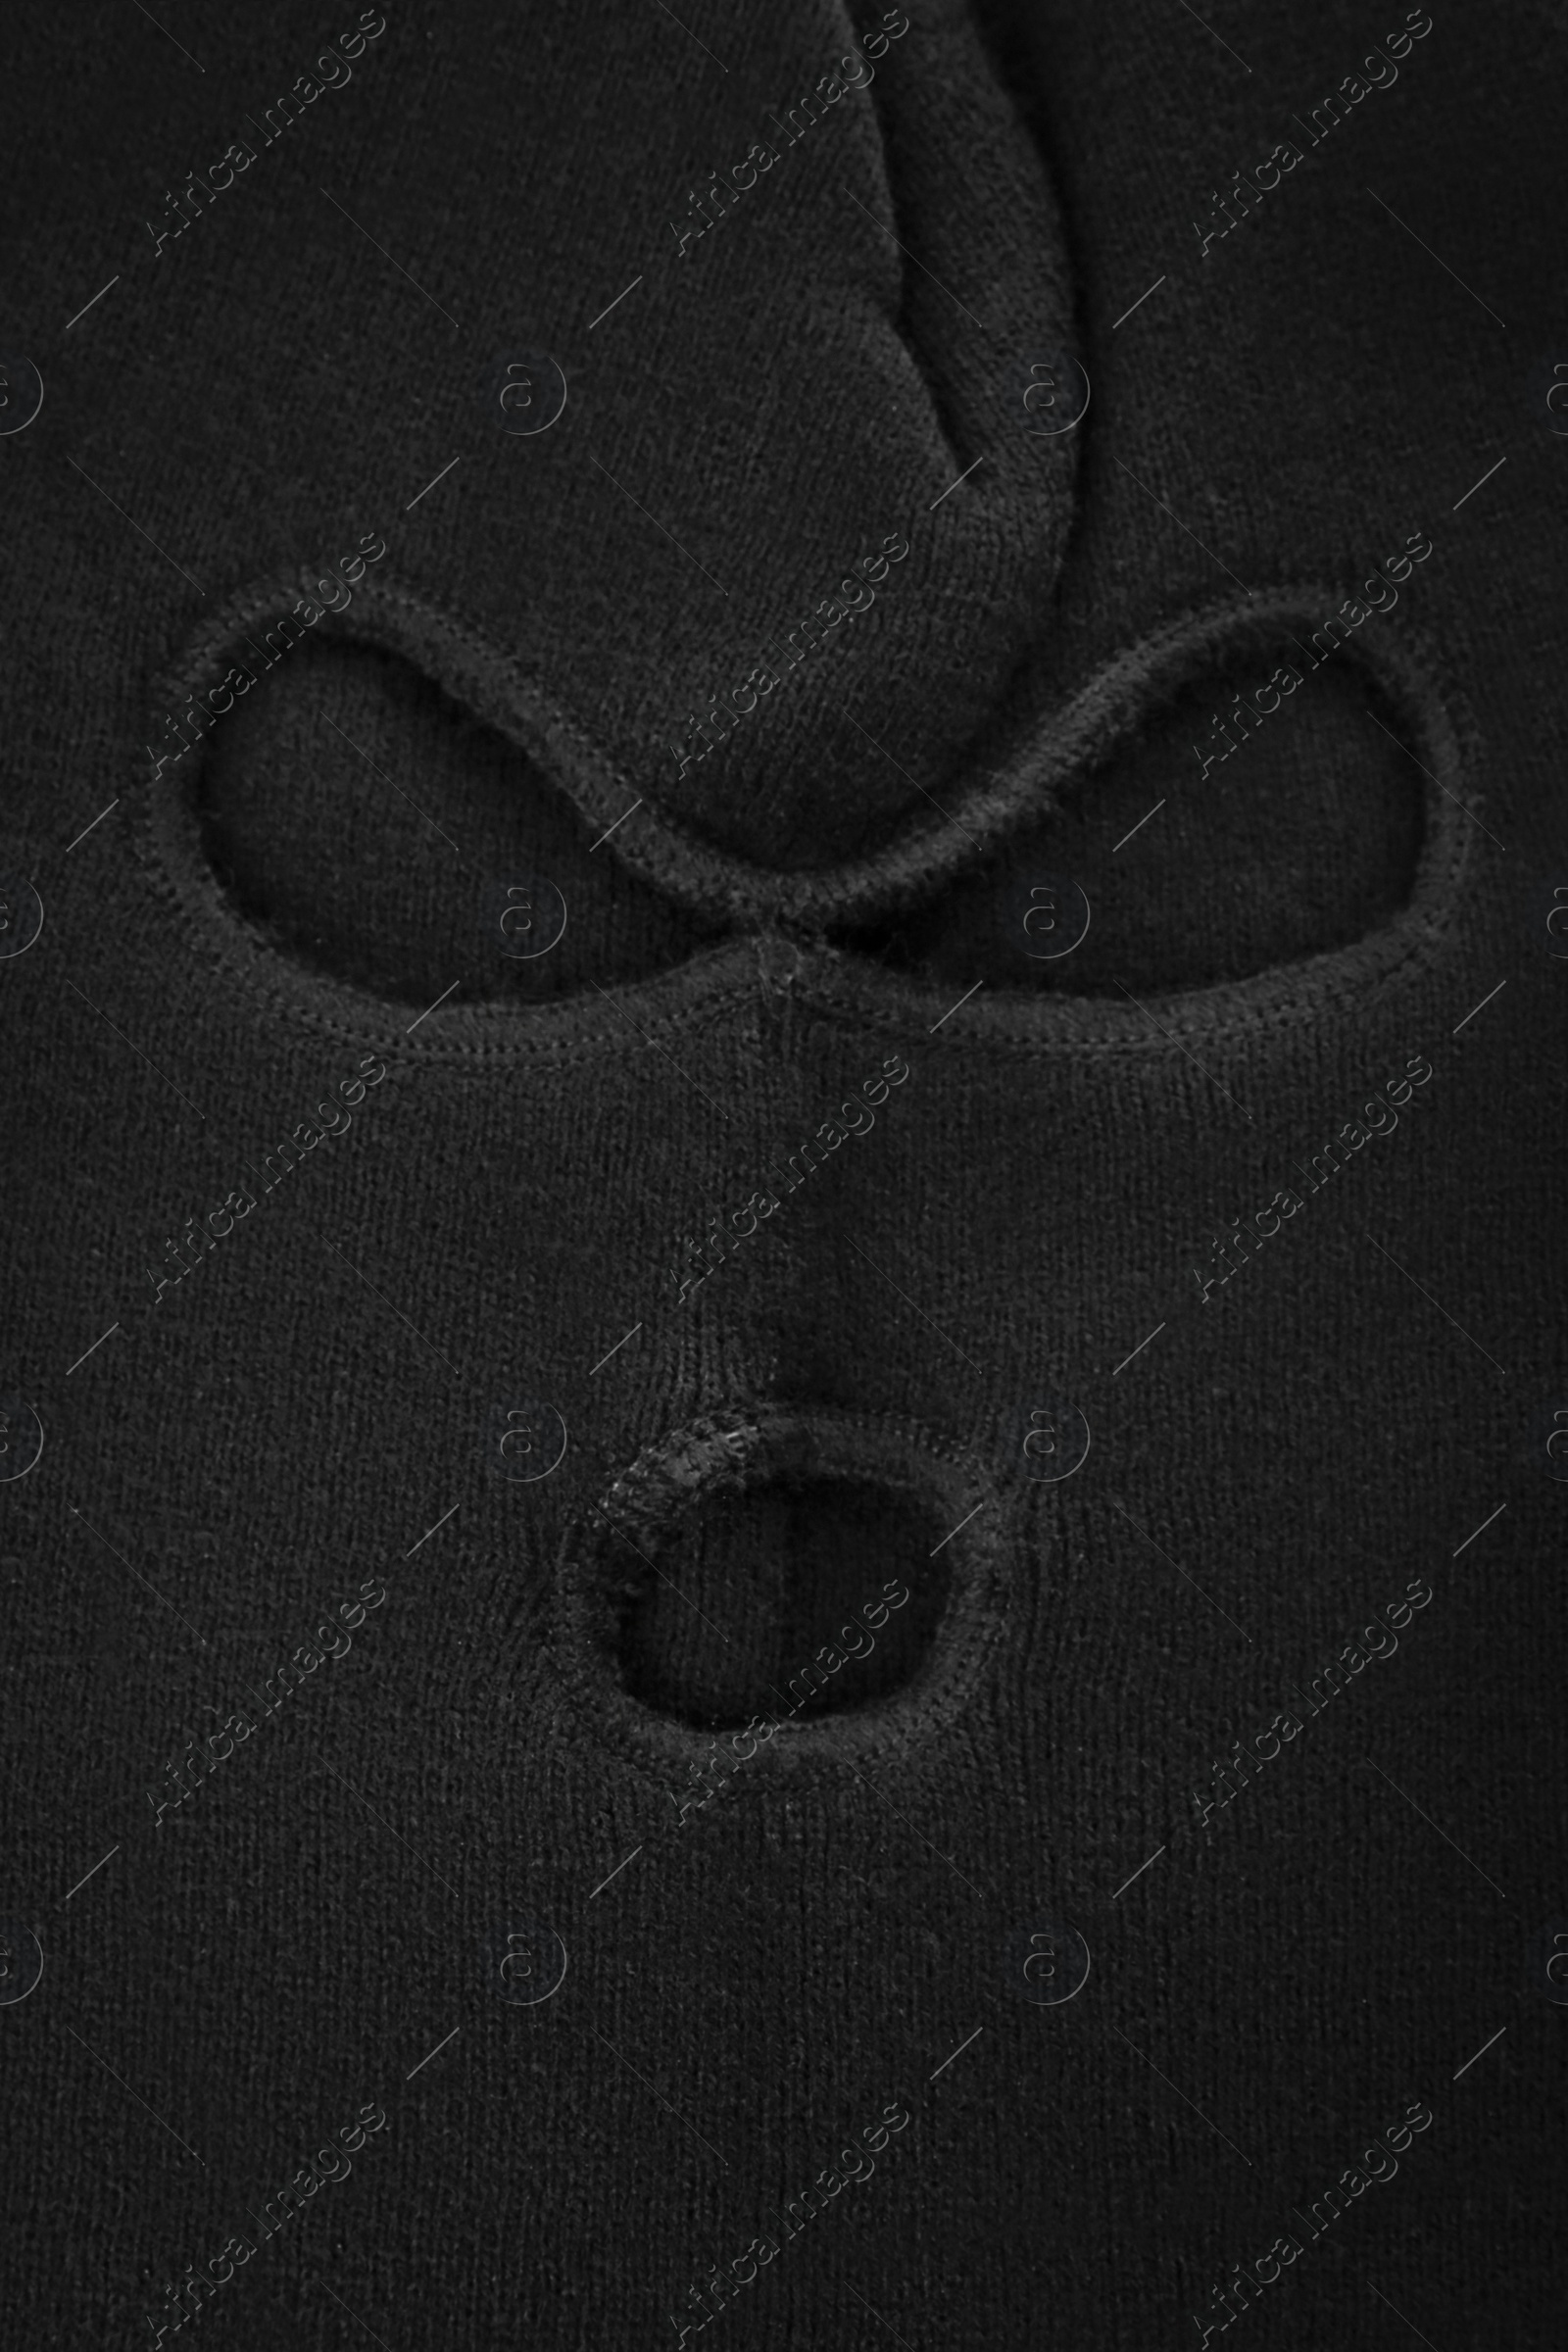 Photo of Black knitted balaclava as background, closeup view